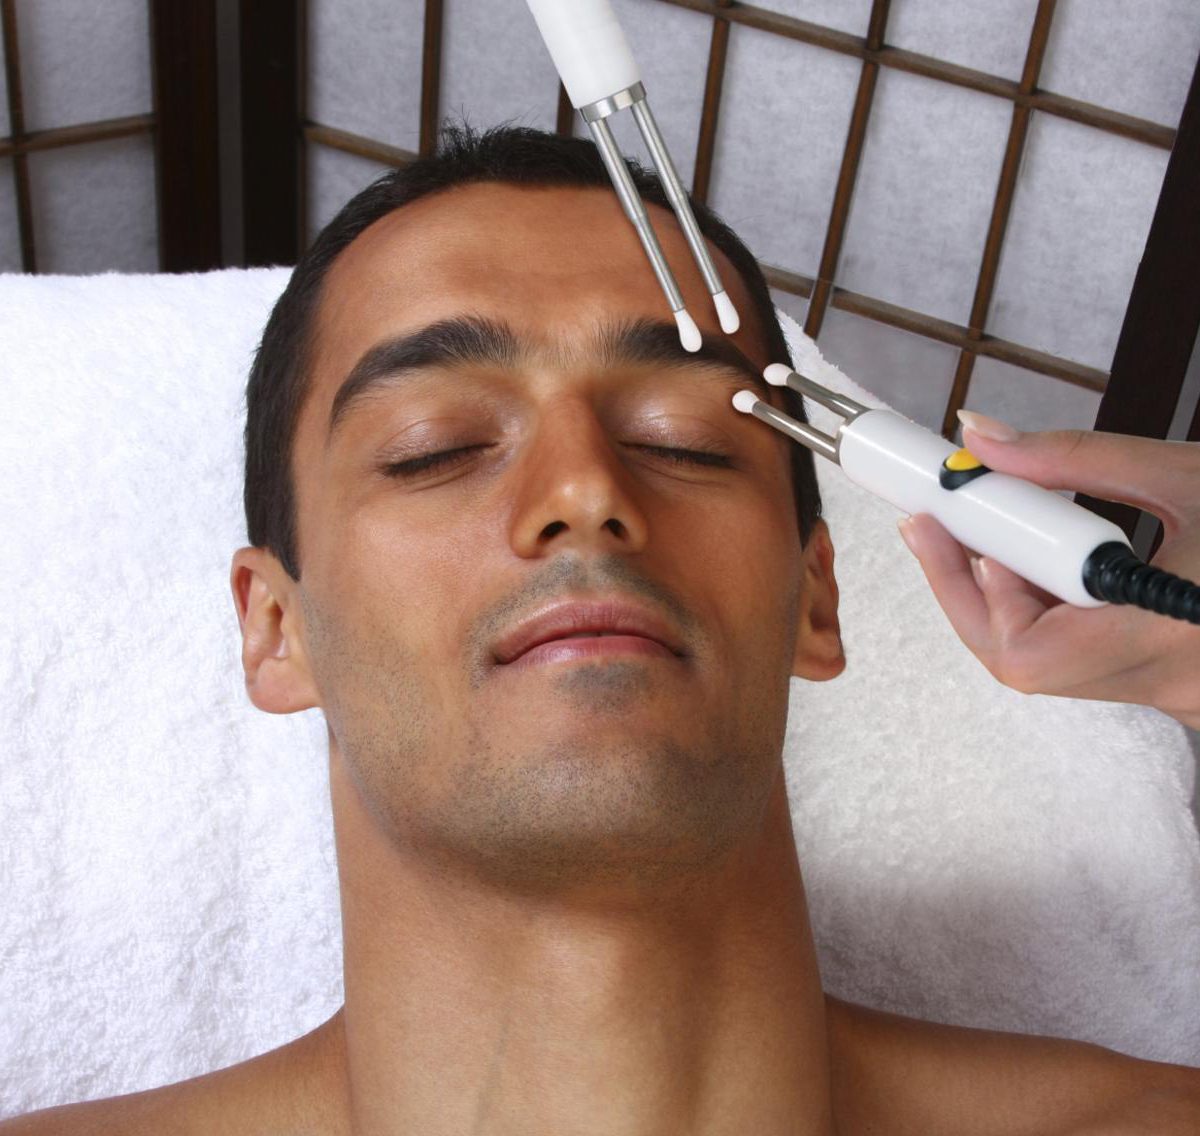 caci treatments for men at synergy beauty salon studley warwickshire